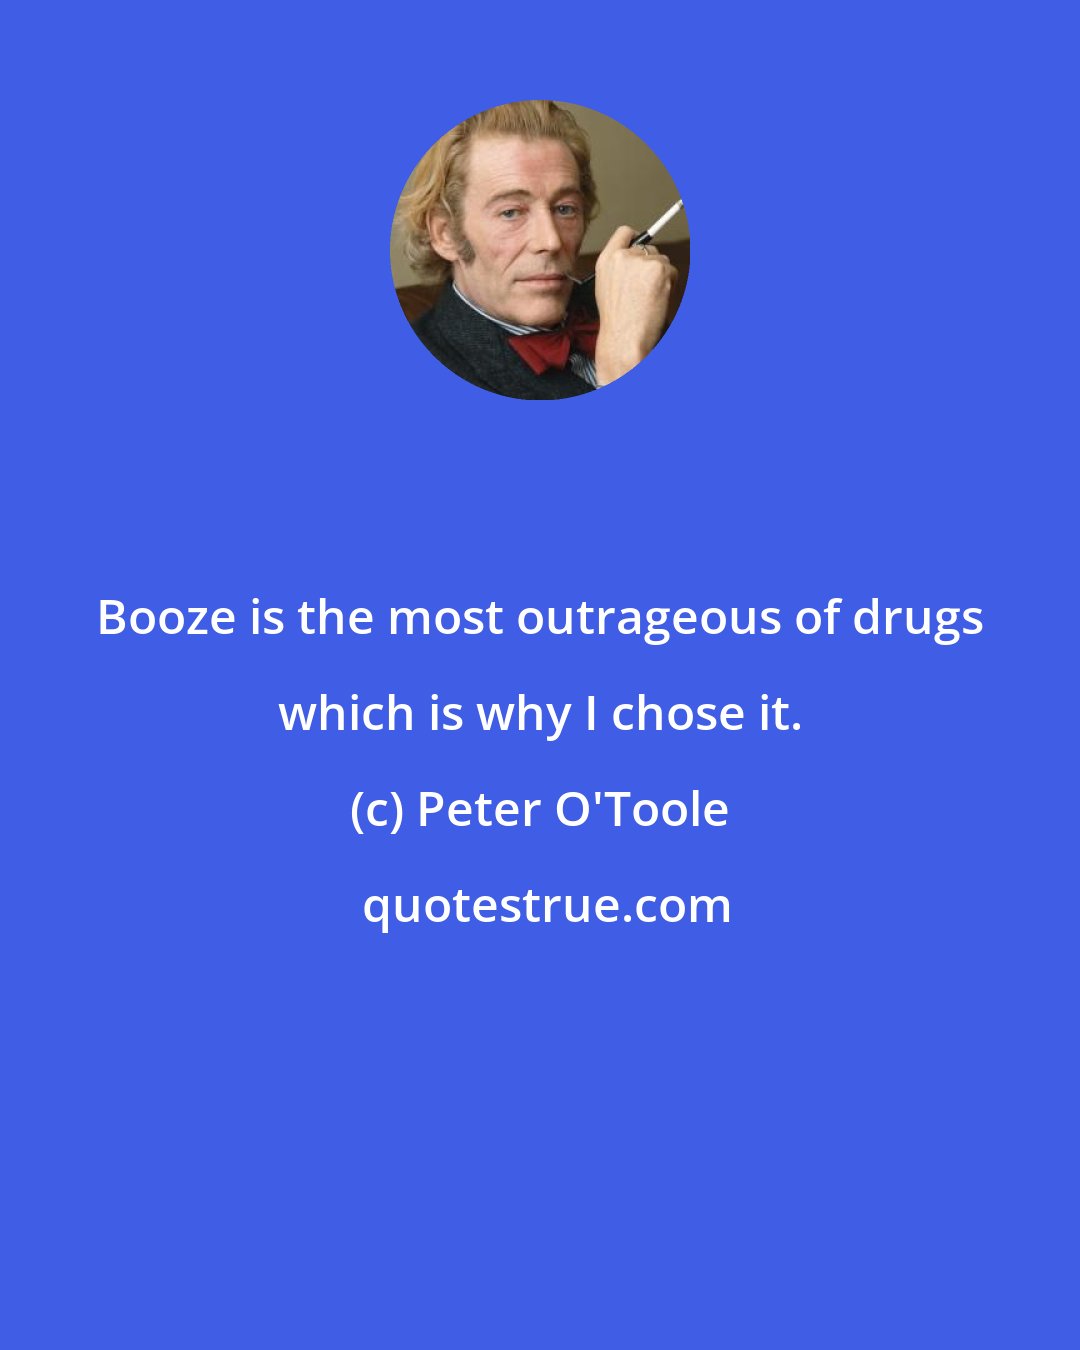 Peter O'Toole: Booze is the most outrageous of drugs which is why I chose it.